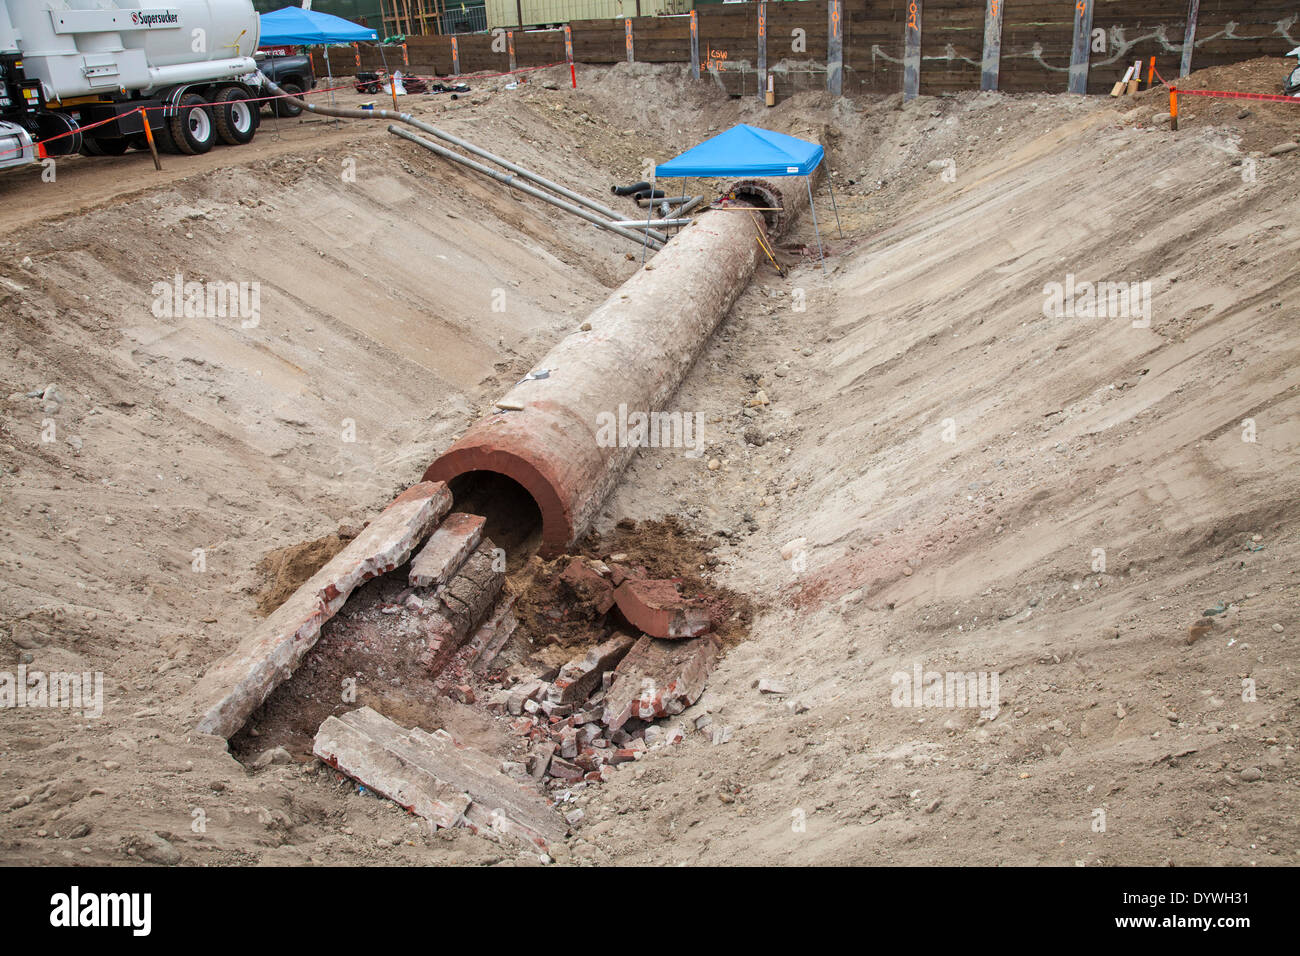 Los Angeles, CA, USA. 25th Apr, 2014. Workers clean out a section and prepare the recently unearthed Zanja Madre, or Mother Ditch, for removal to the nearby Metabolic Studios for safe keeping. The 100 foot section and 4 foot diameter of brick pipe was found at a construction site at Chinatown and is a remnant of the 90 mile network of channels that brought water to the early inhabitants of Los Angeles. Originally built in 1781 it was enclosed in 1877 and eventually abandoned in 1904. Credit:  Ambient Images Inc./Alamy Live News Stock Photo